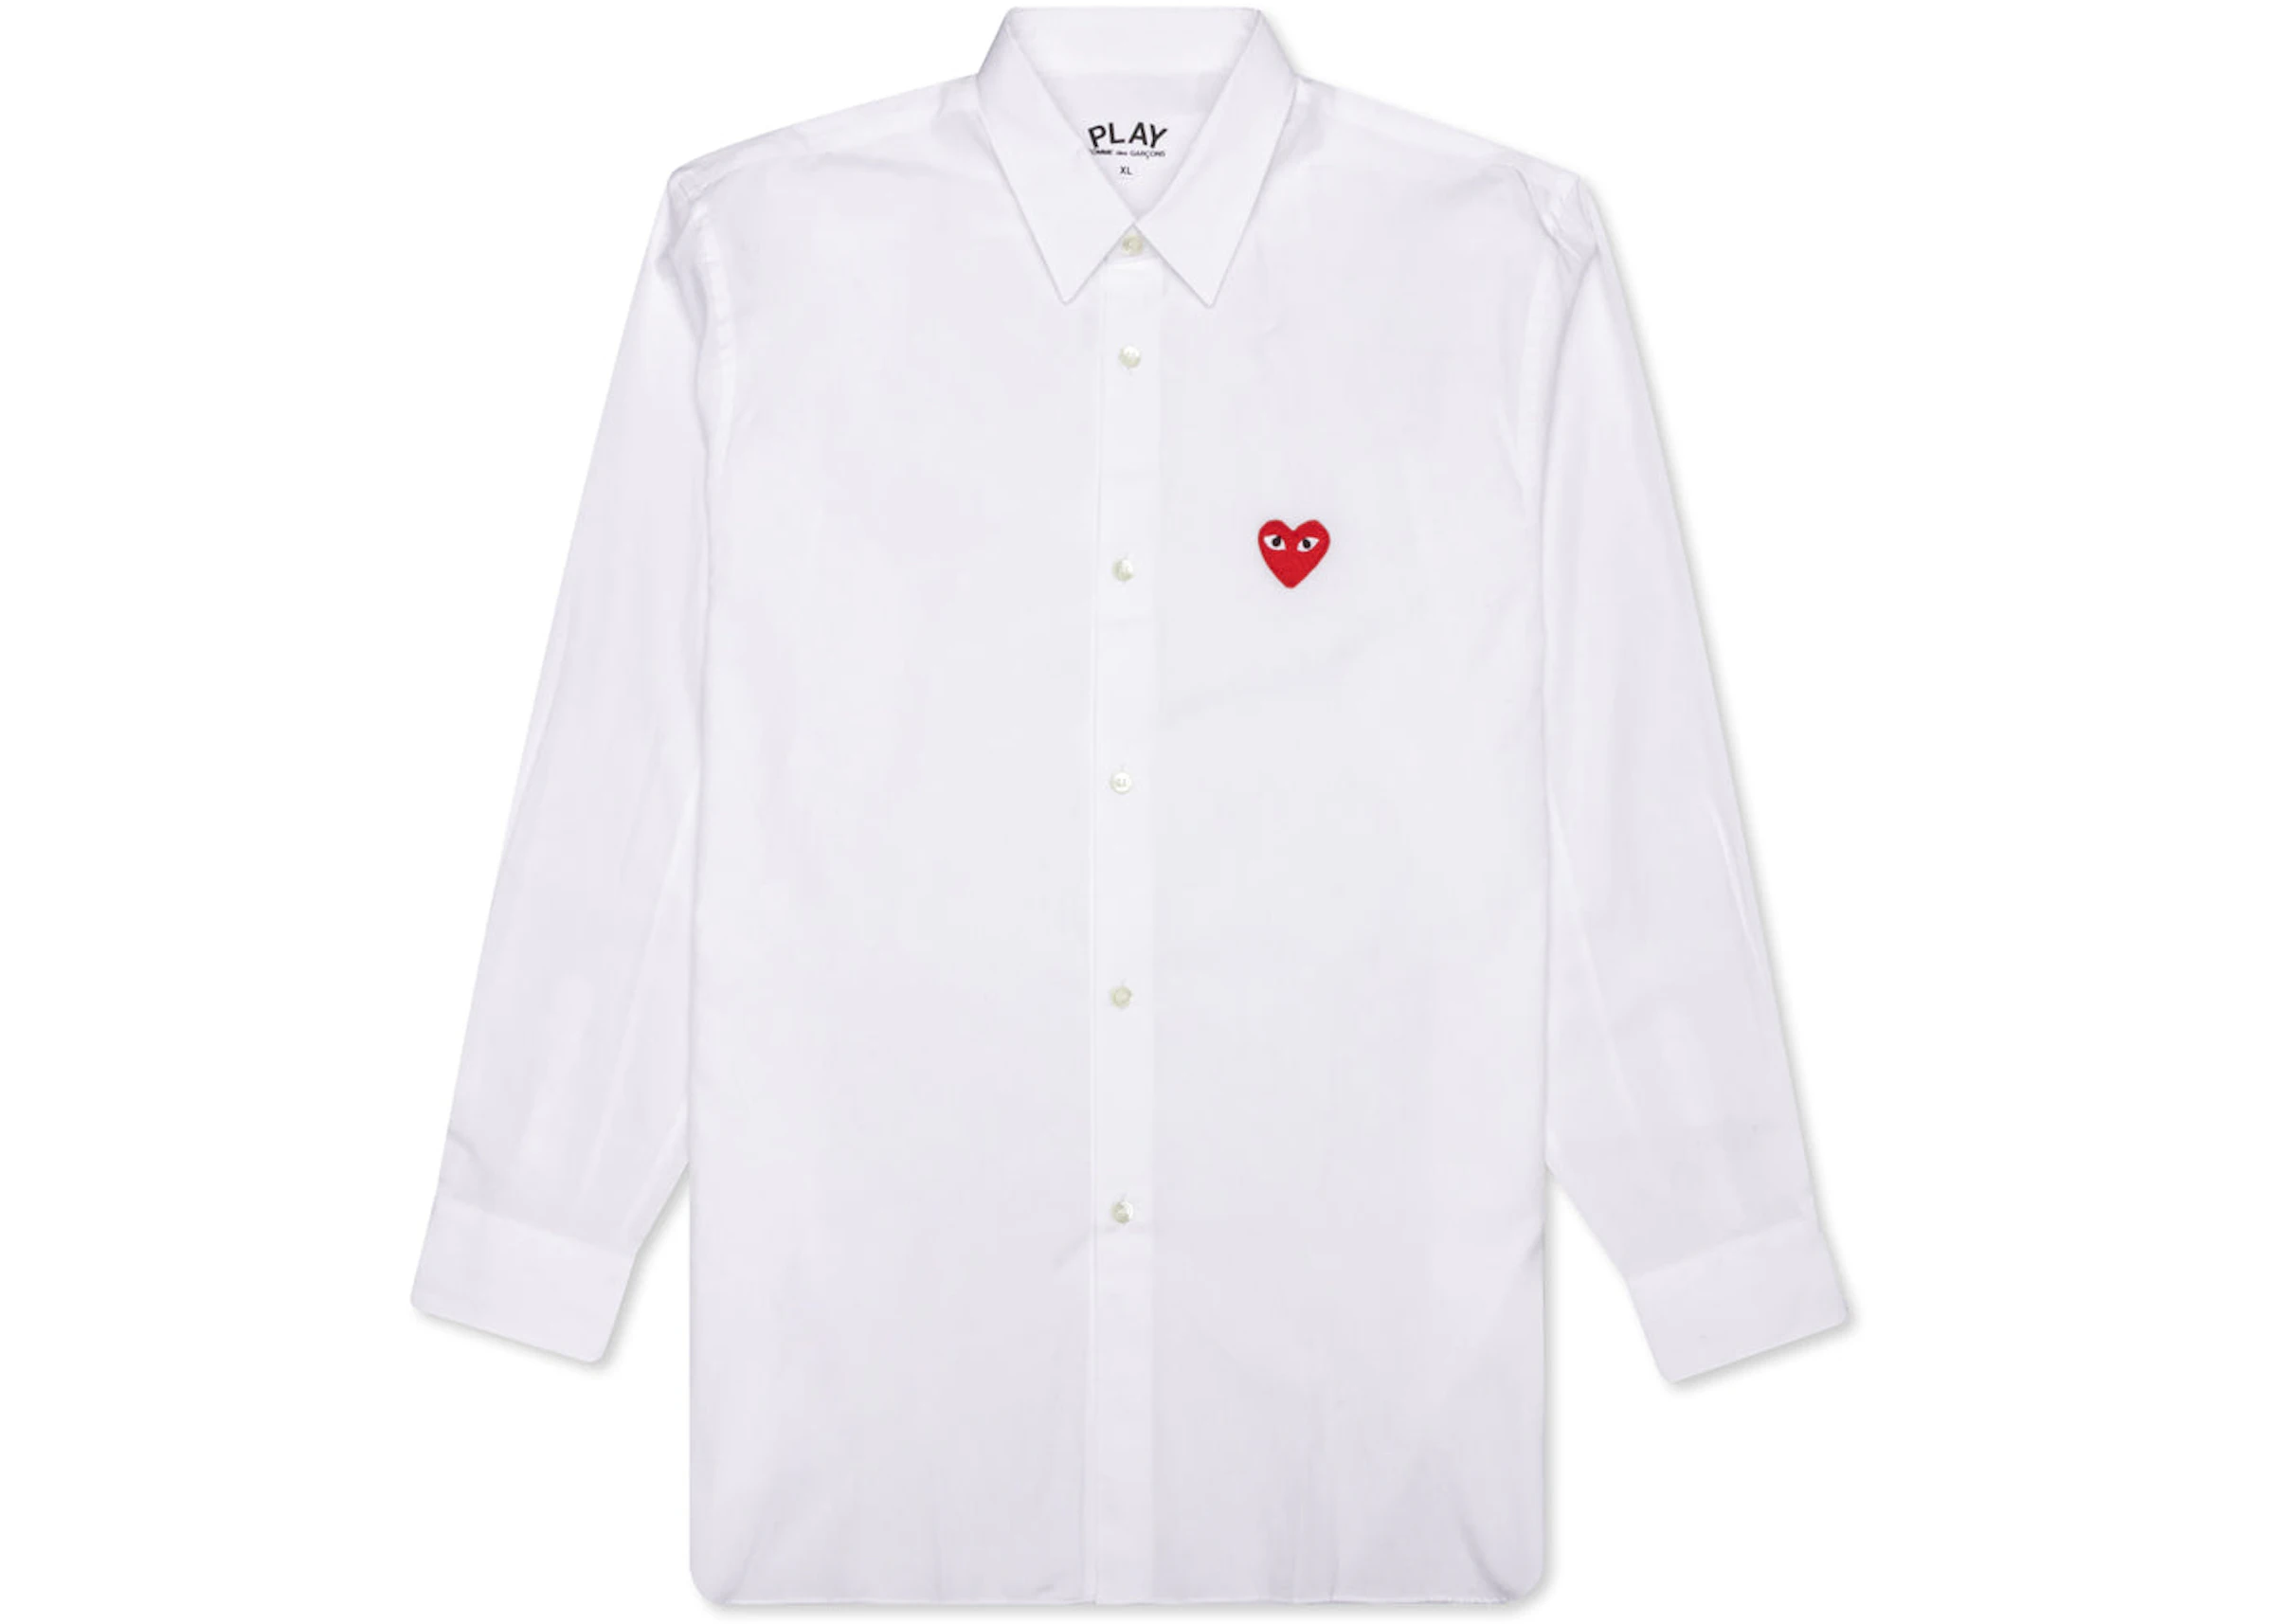 CDG Play Red Emblem Button Up Shirt White - IT